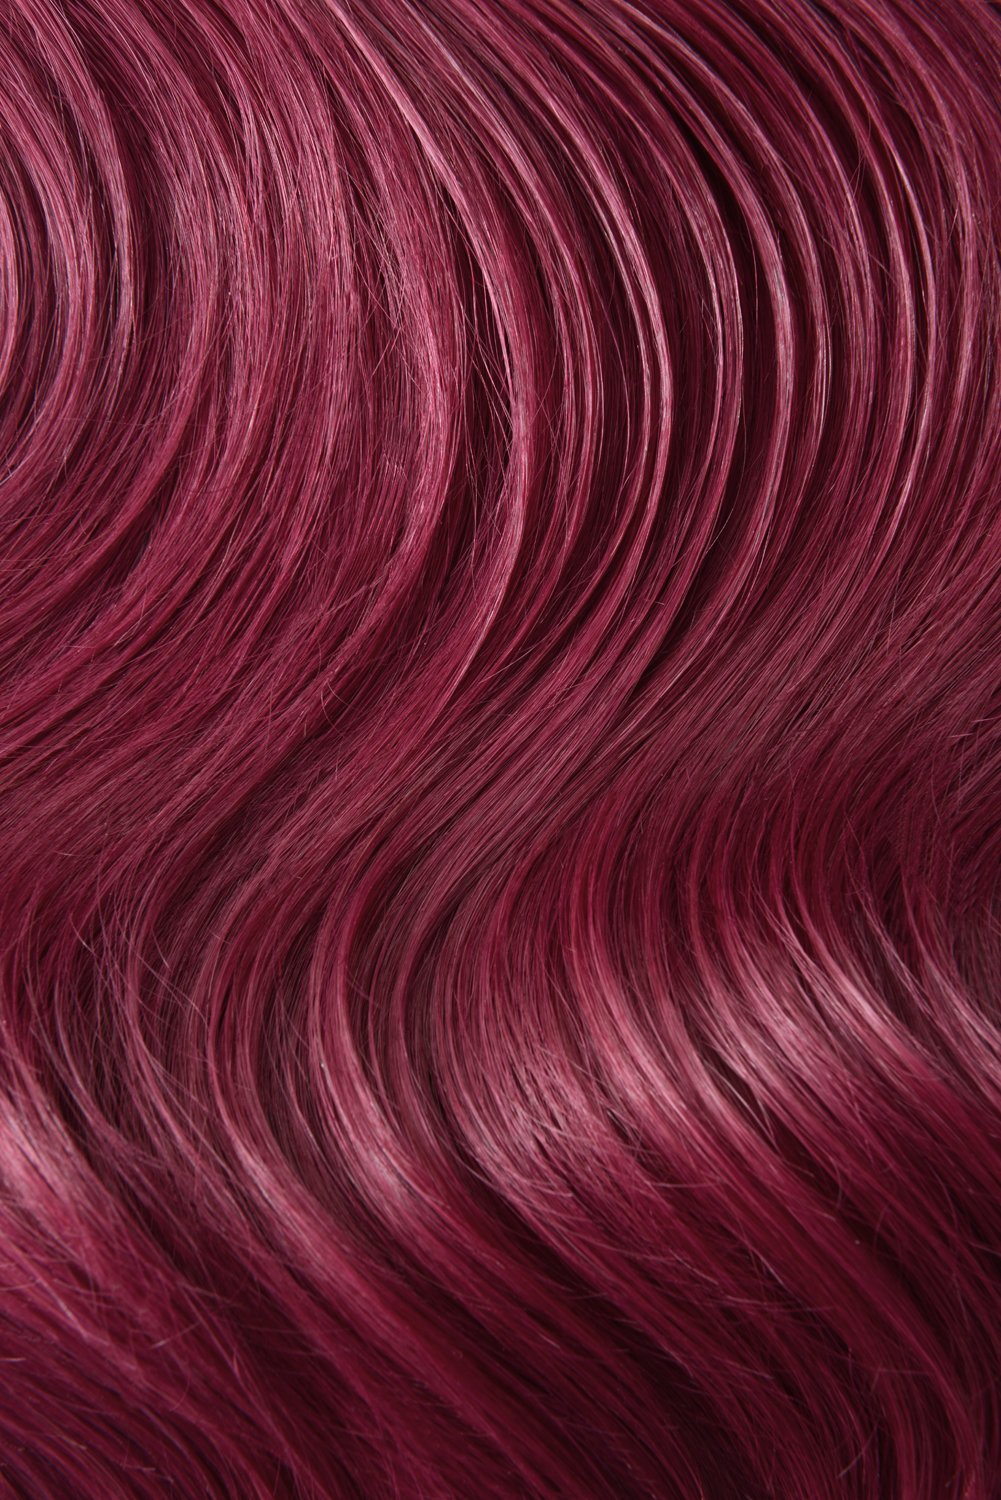 Double Wefted Full Head Remy Clip in Human Hair Extensions - Plum/Cherry Red (#530)